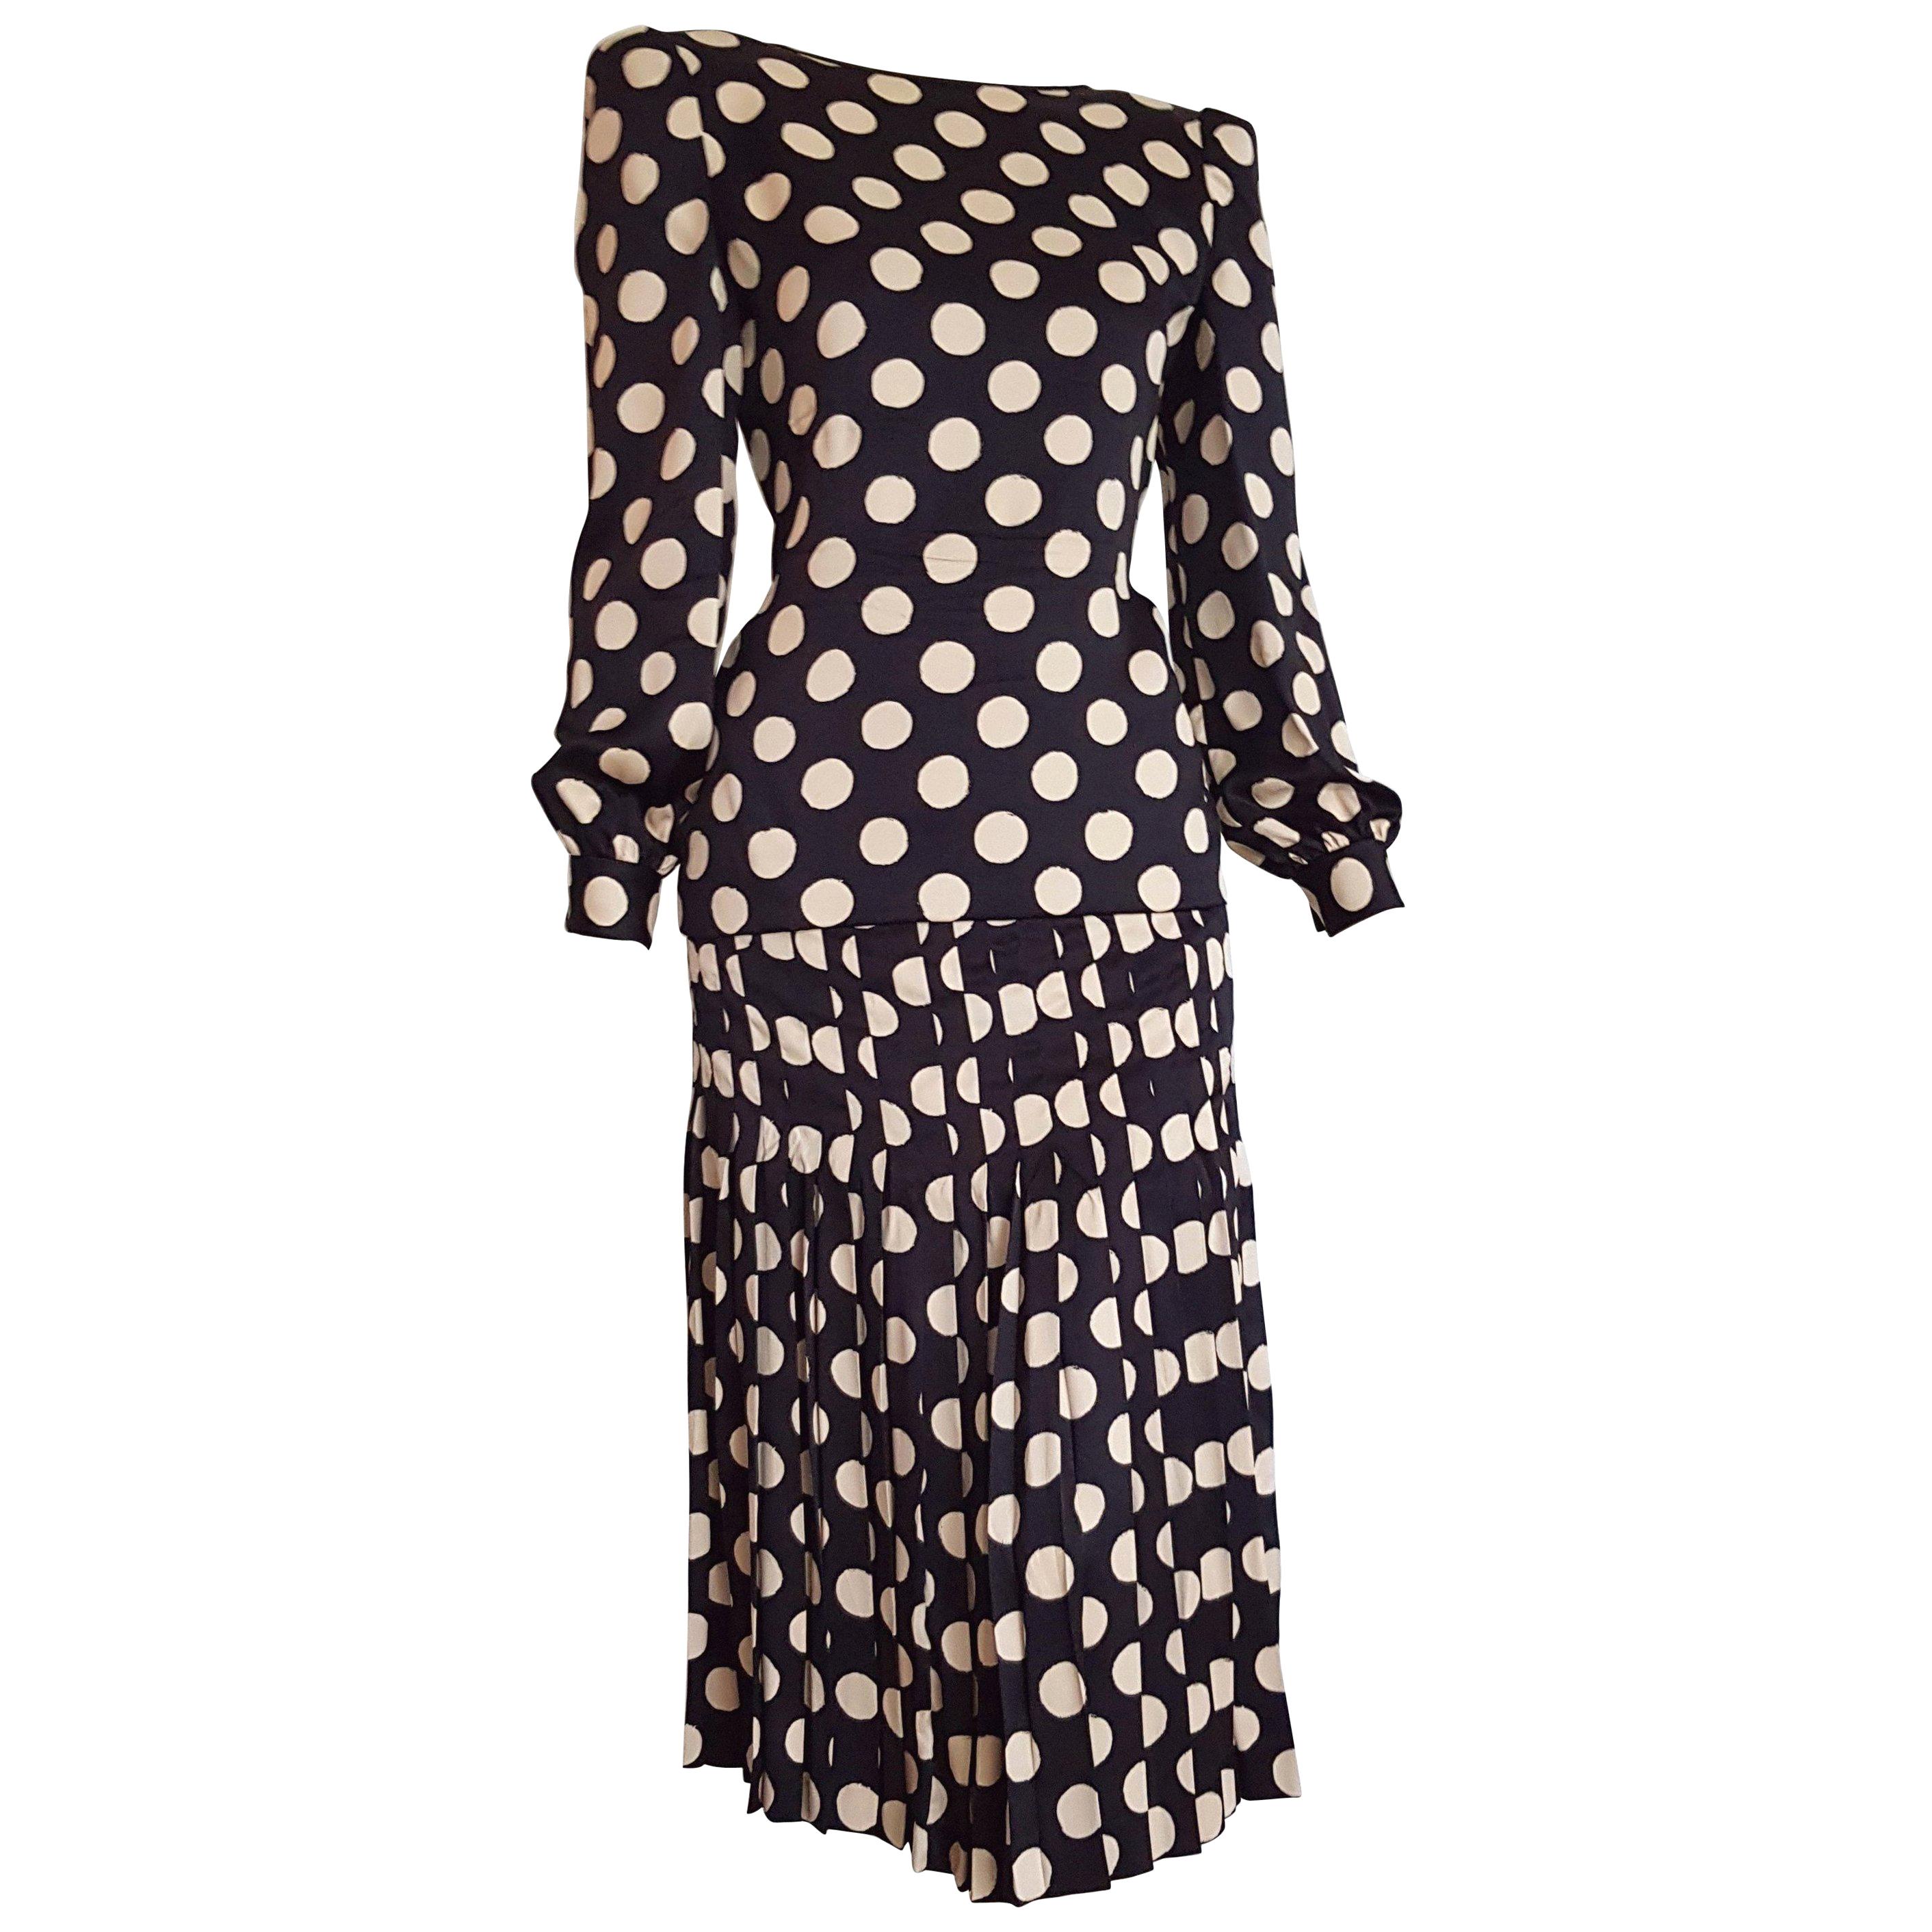 VALENTINO Haute Couture Black silk with white polka dots, Flower on the back, suit skirt - Unworn, New.
..
SIZE: equivalent to about Small / Medium, please review approx measurements as follows in cm. 
JACKET BLOUSE: lenght 60, chest underarm to